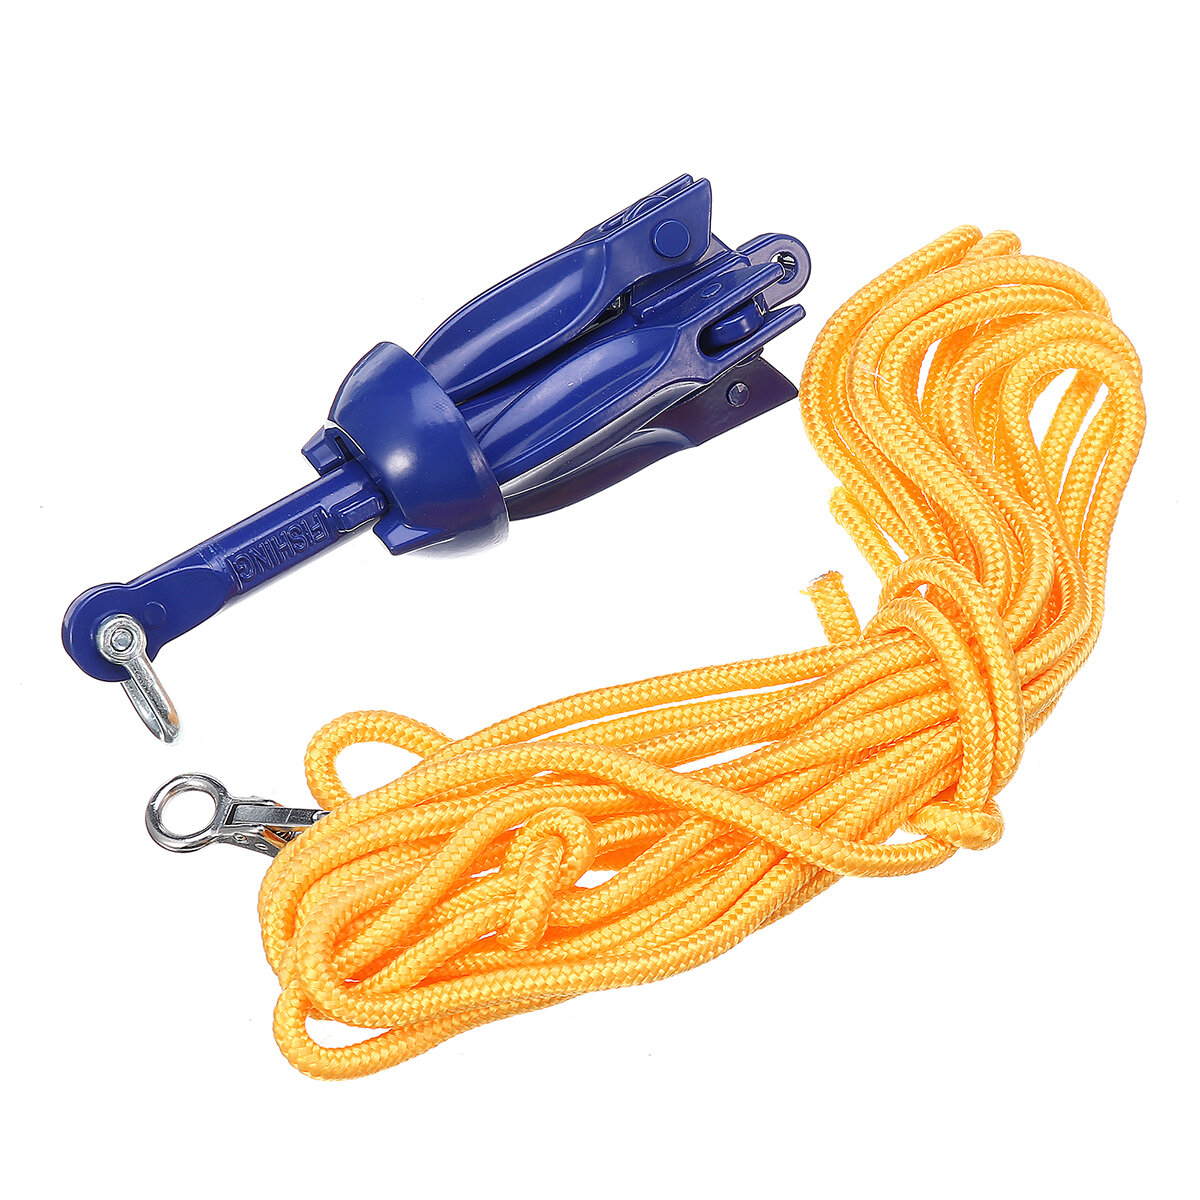 1.5kg/3.3lbs 5m anchor kit with rope bag system for canoe kayak boat accessories